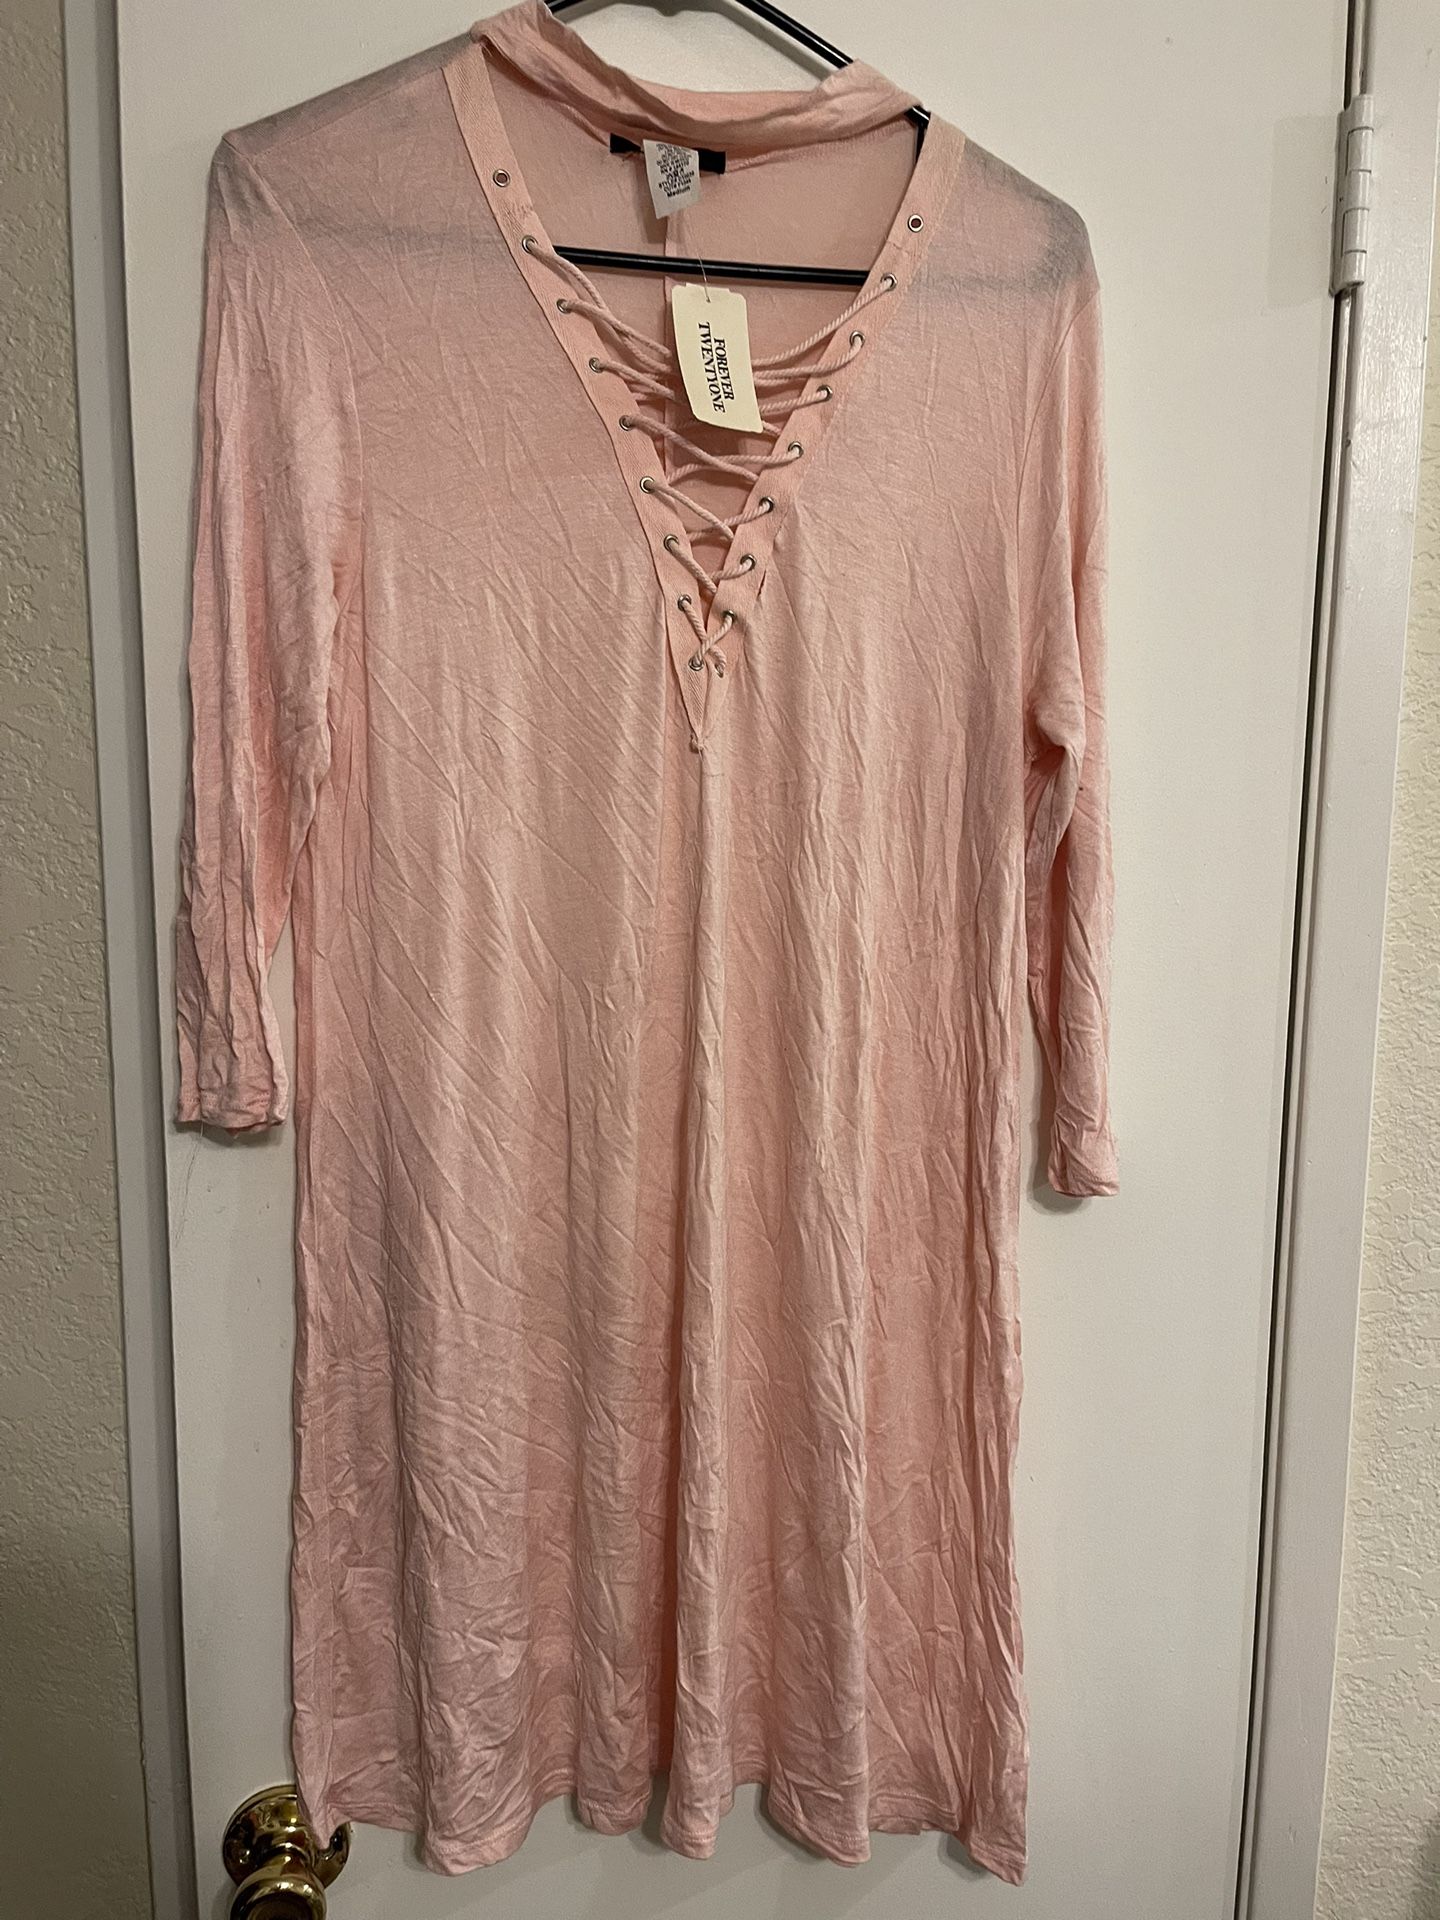 NWT Pink Dress Size M - Forever 21 